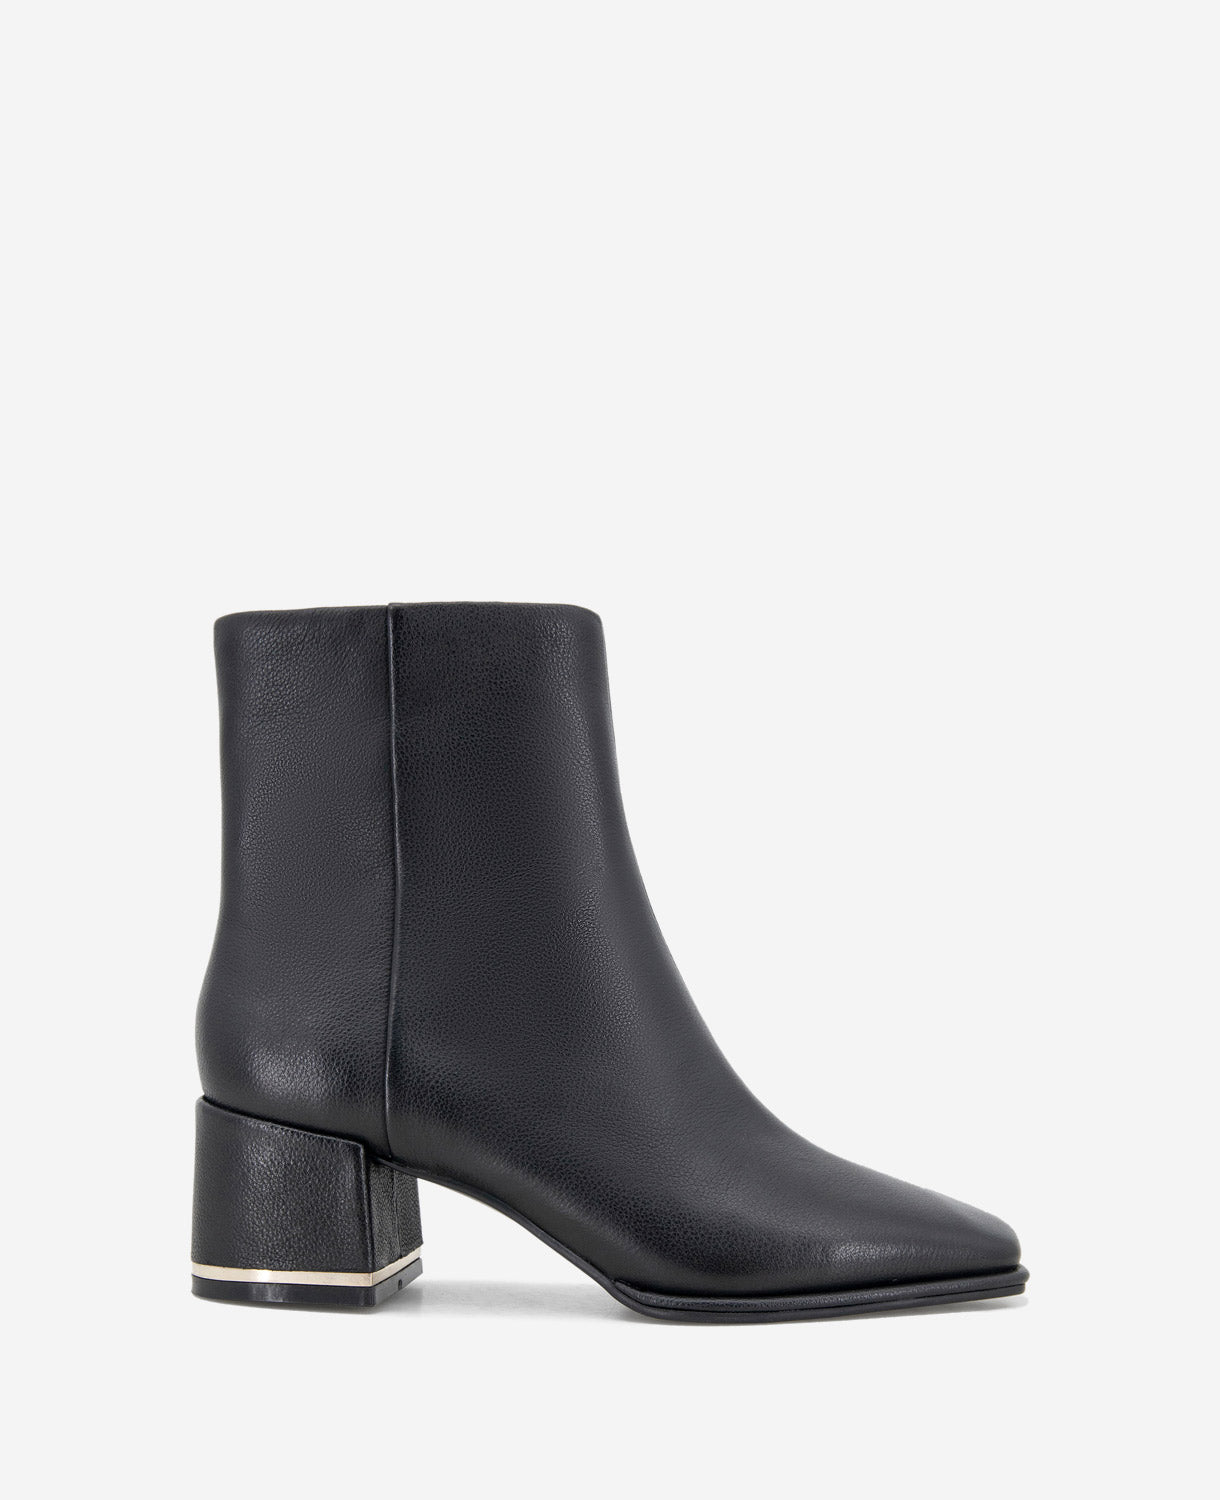 KENNETH COLE EDIE LEATHER BOOTIE